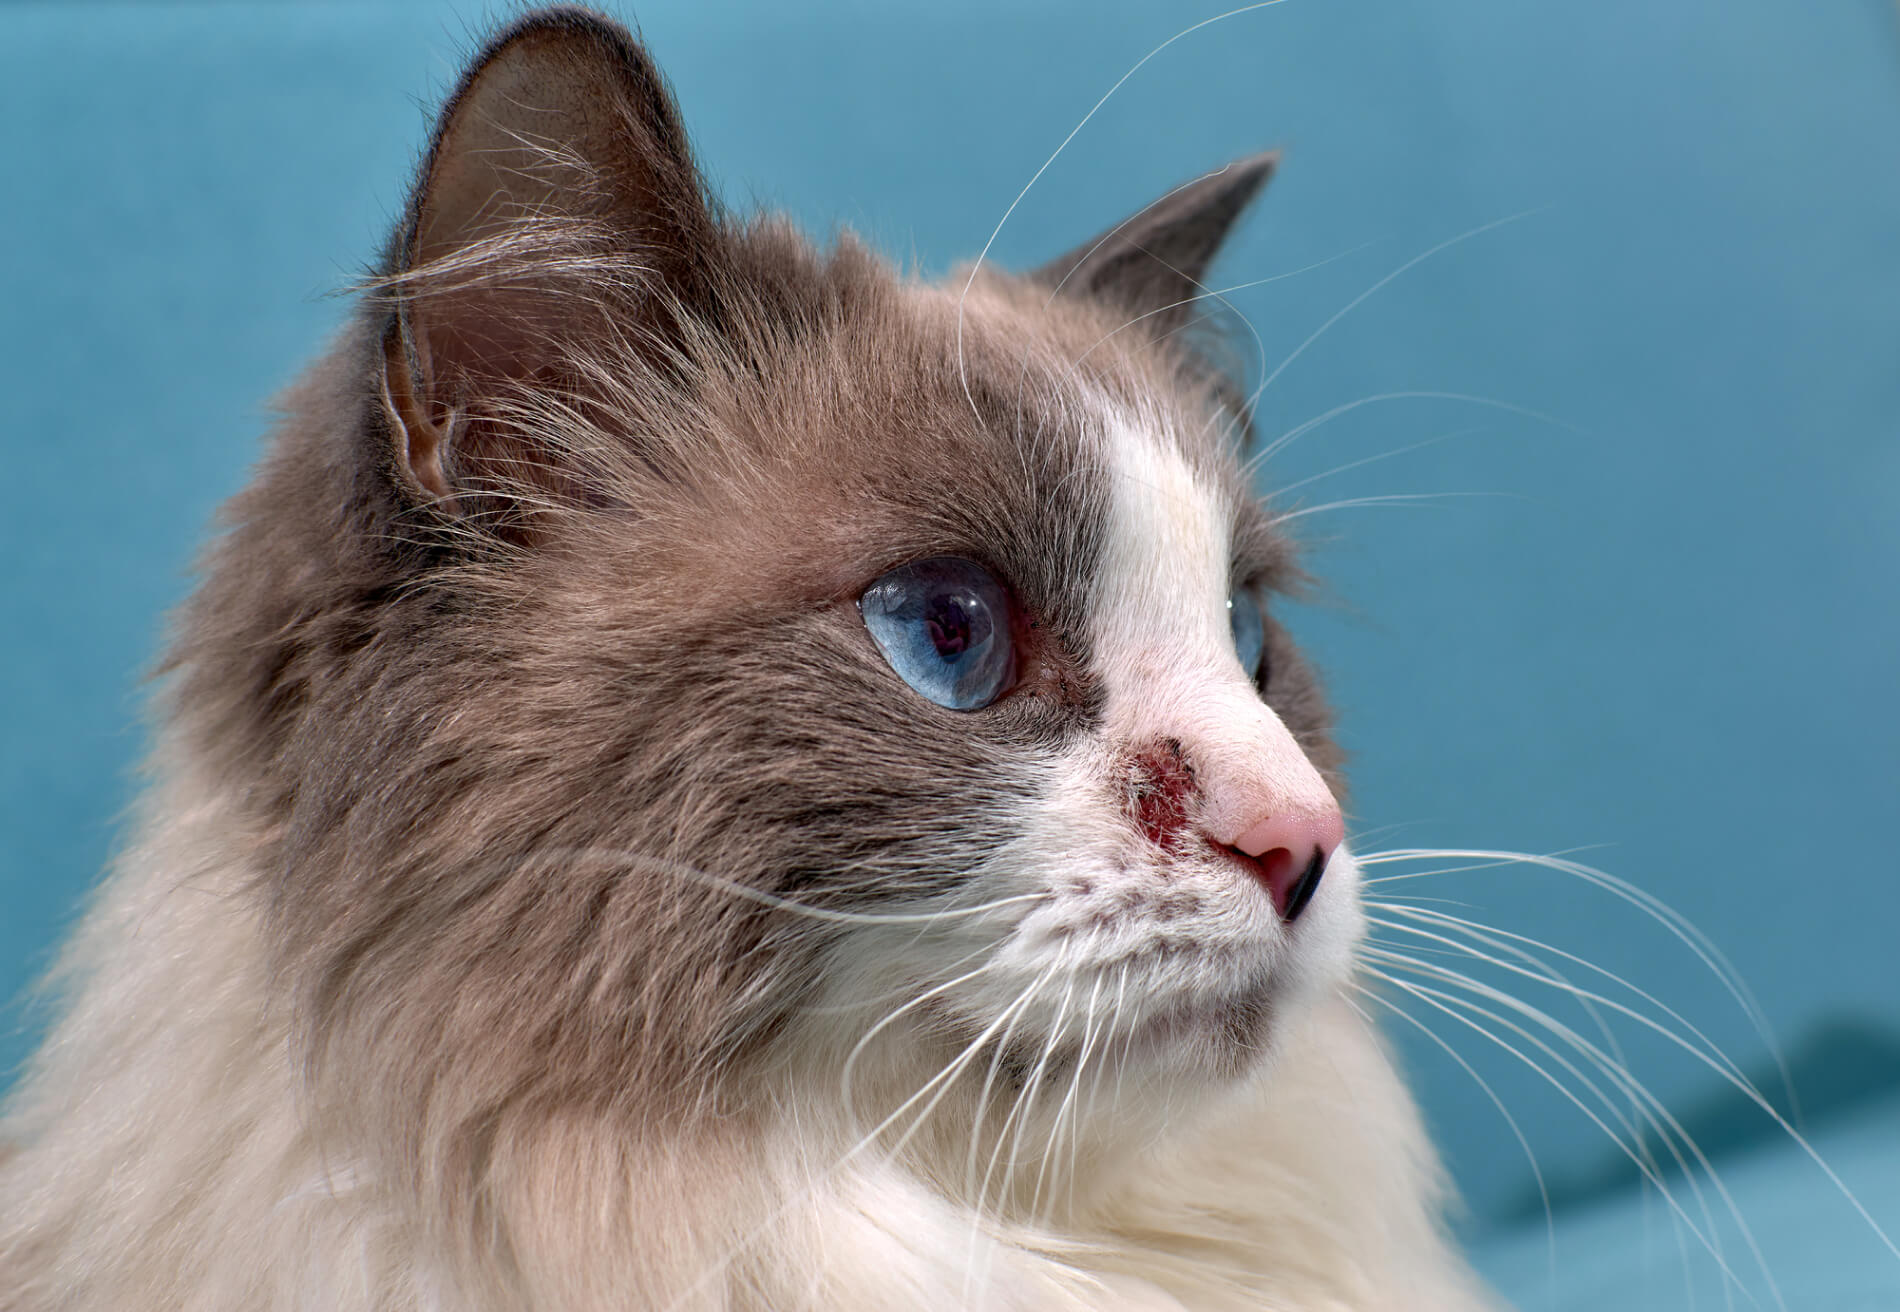 Skin diseases in cats: Causes, symptoms and treatment options